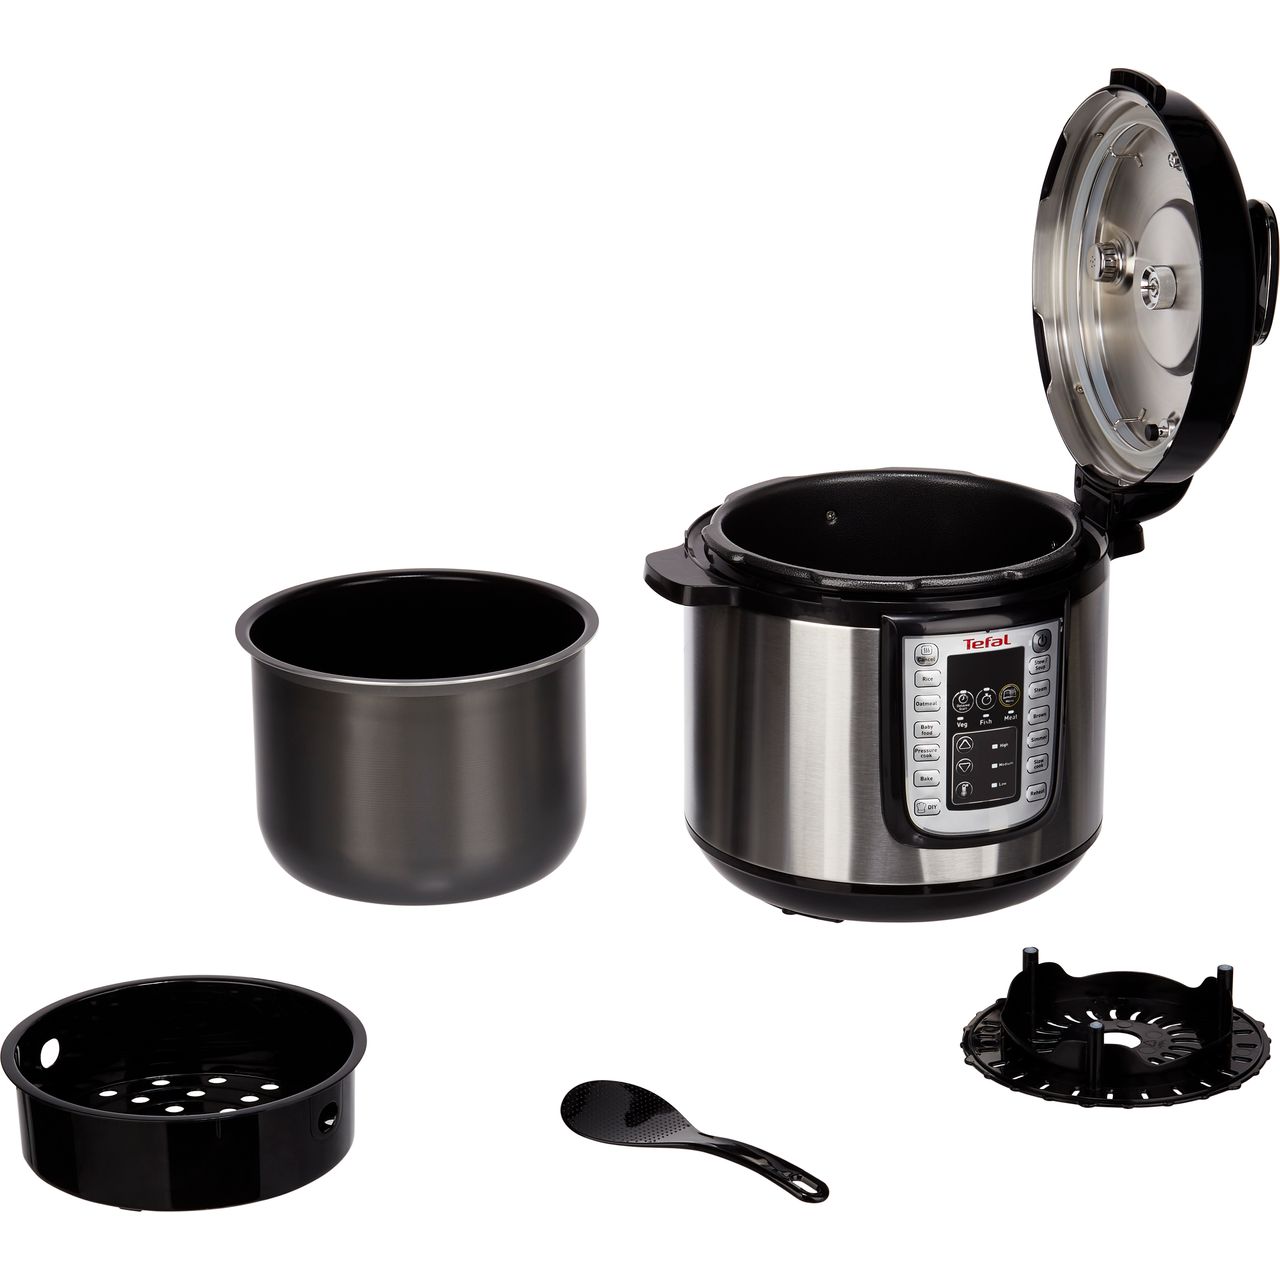 Tefal One Pot Multicooker, CY505E30, All-in-One Electric Pressure Cooker